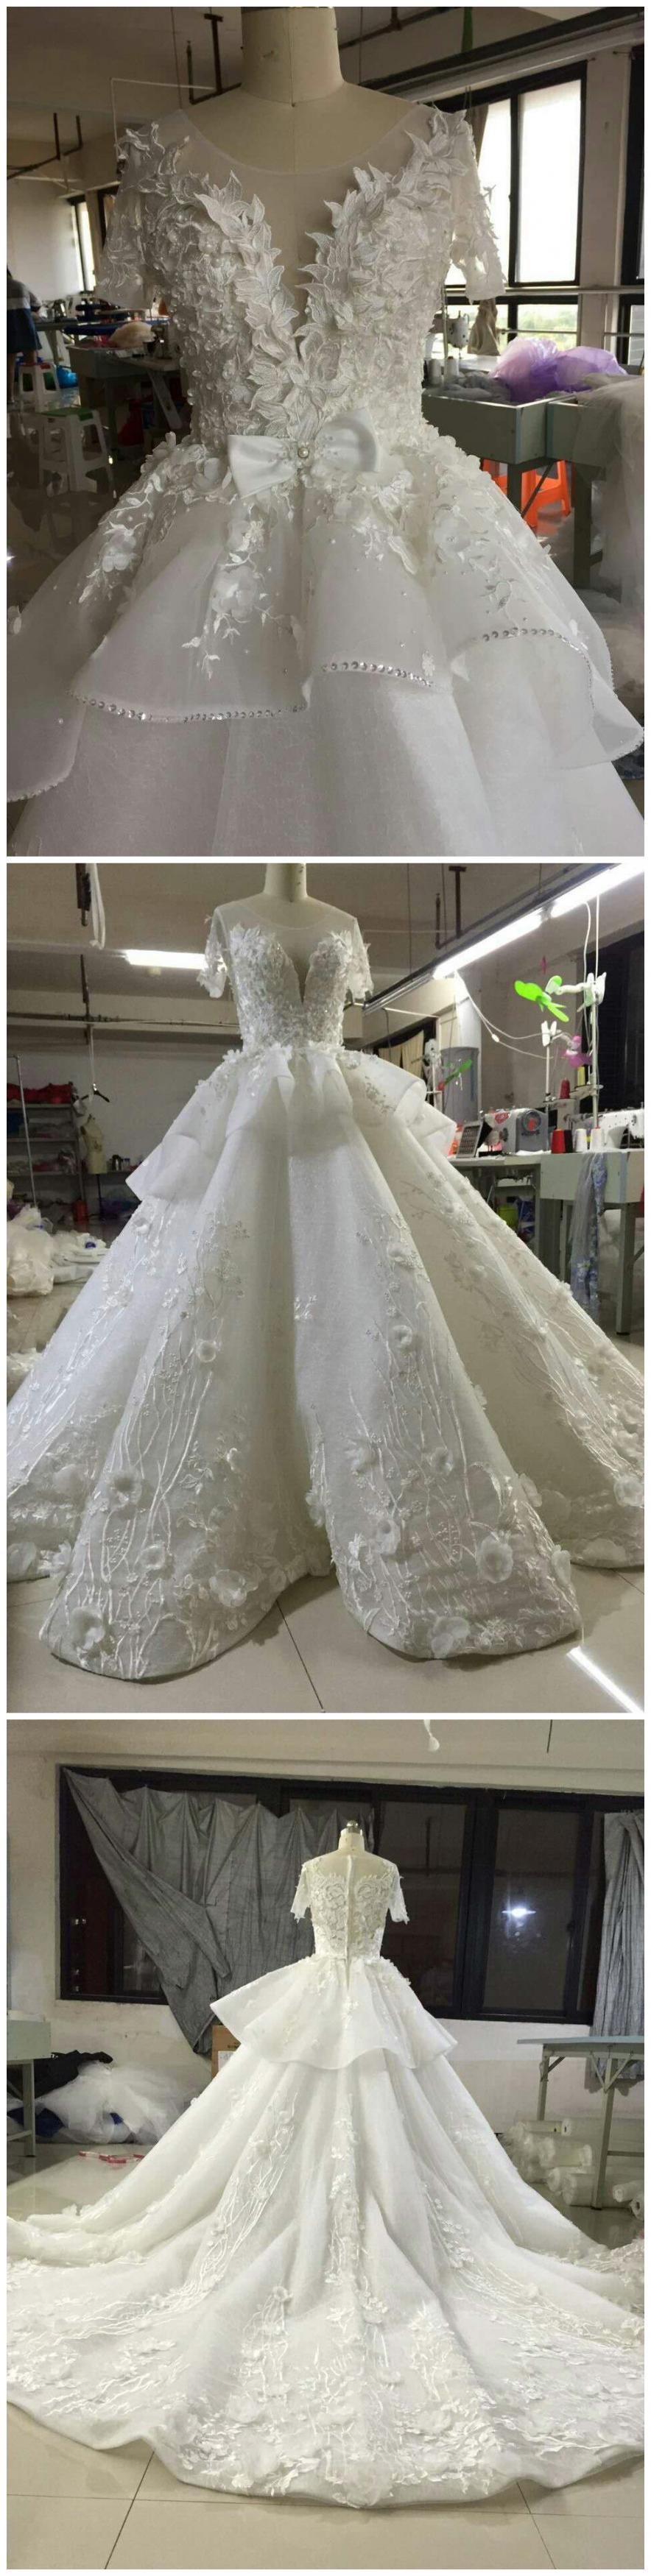 Real Photo Double V-Neck Organza short Wedding Dress 2017 Illusion Chapel Train Hand Made Bridal gown Back Button Size Plus